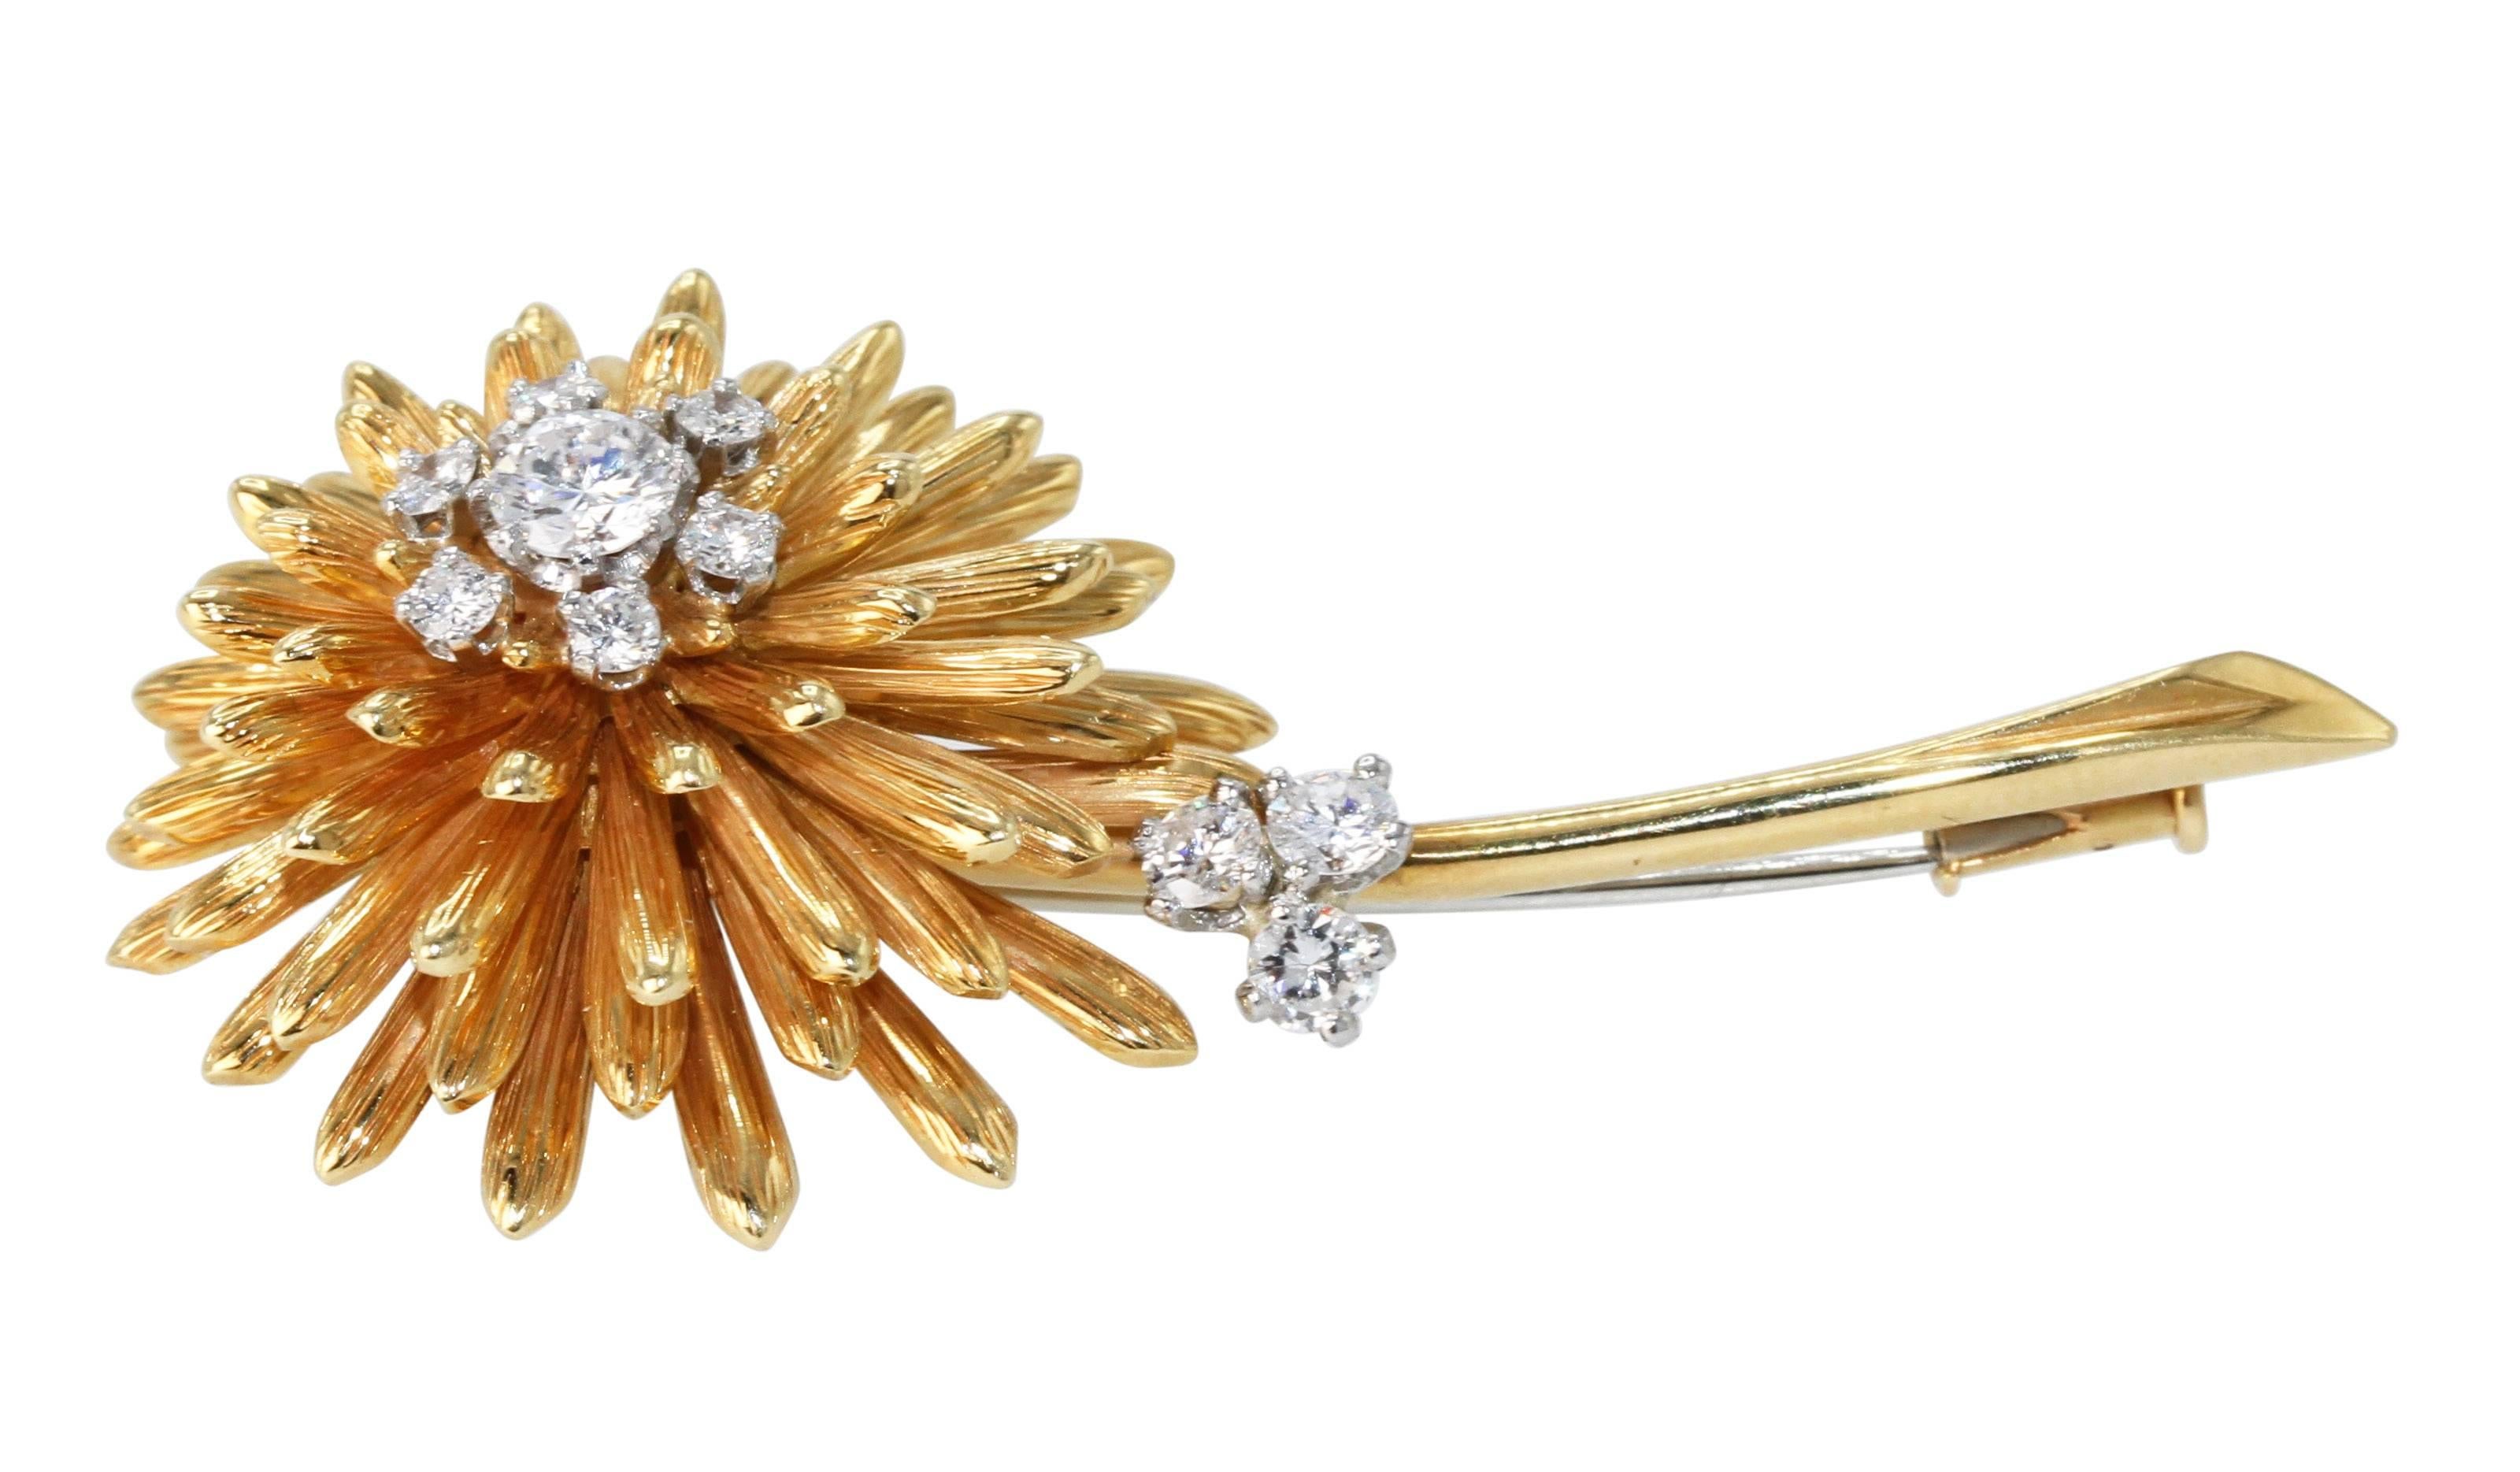 18 Karat Gold and Diamond Flower Brooch by Cartier, circa 1970
• Signed Cartier, numbered L9081
• 10 round diamonds weighing approximately 0.75 carat
• Gross weight 19.3 grams, measuring 2 by 1 inches